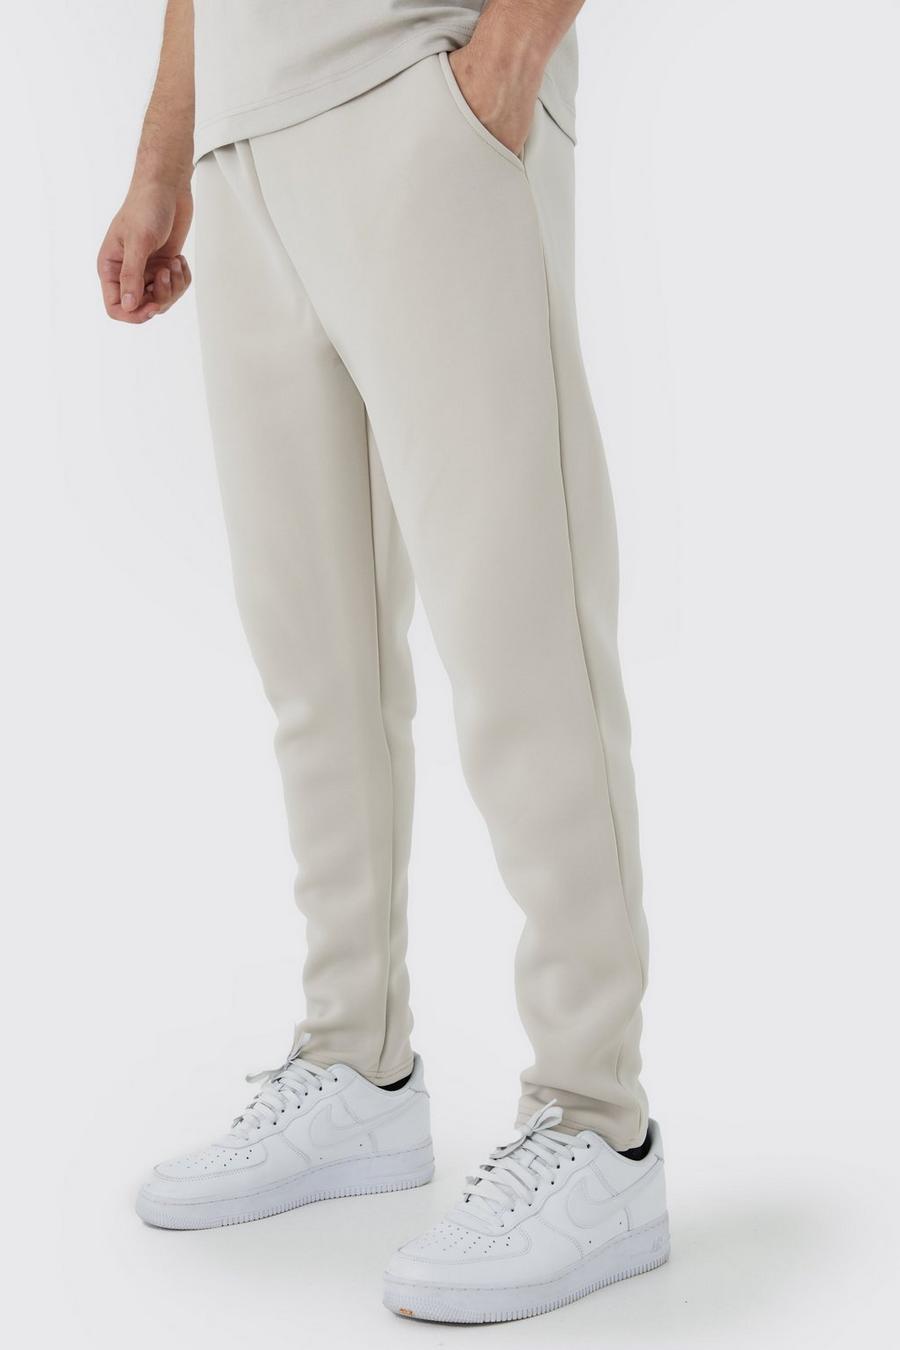 Stone Tall Slim Tapered Cropped Bonded Scuba Jogger